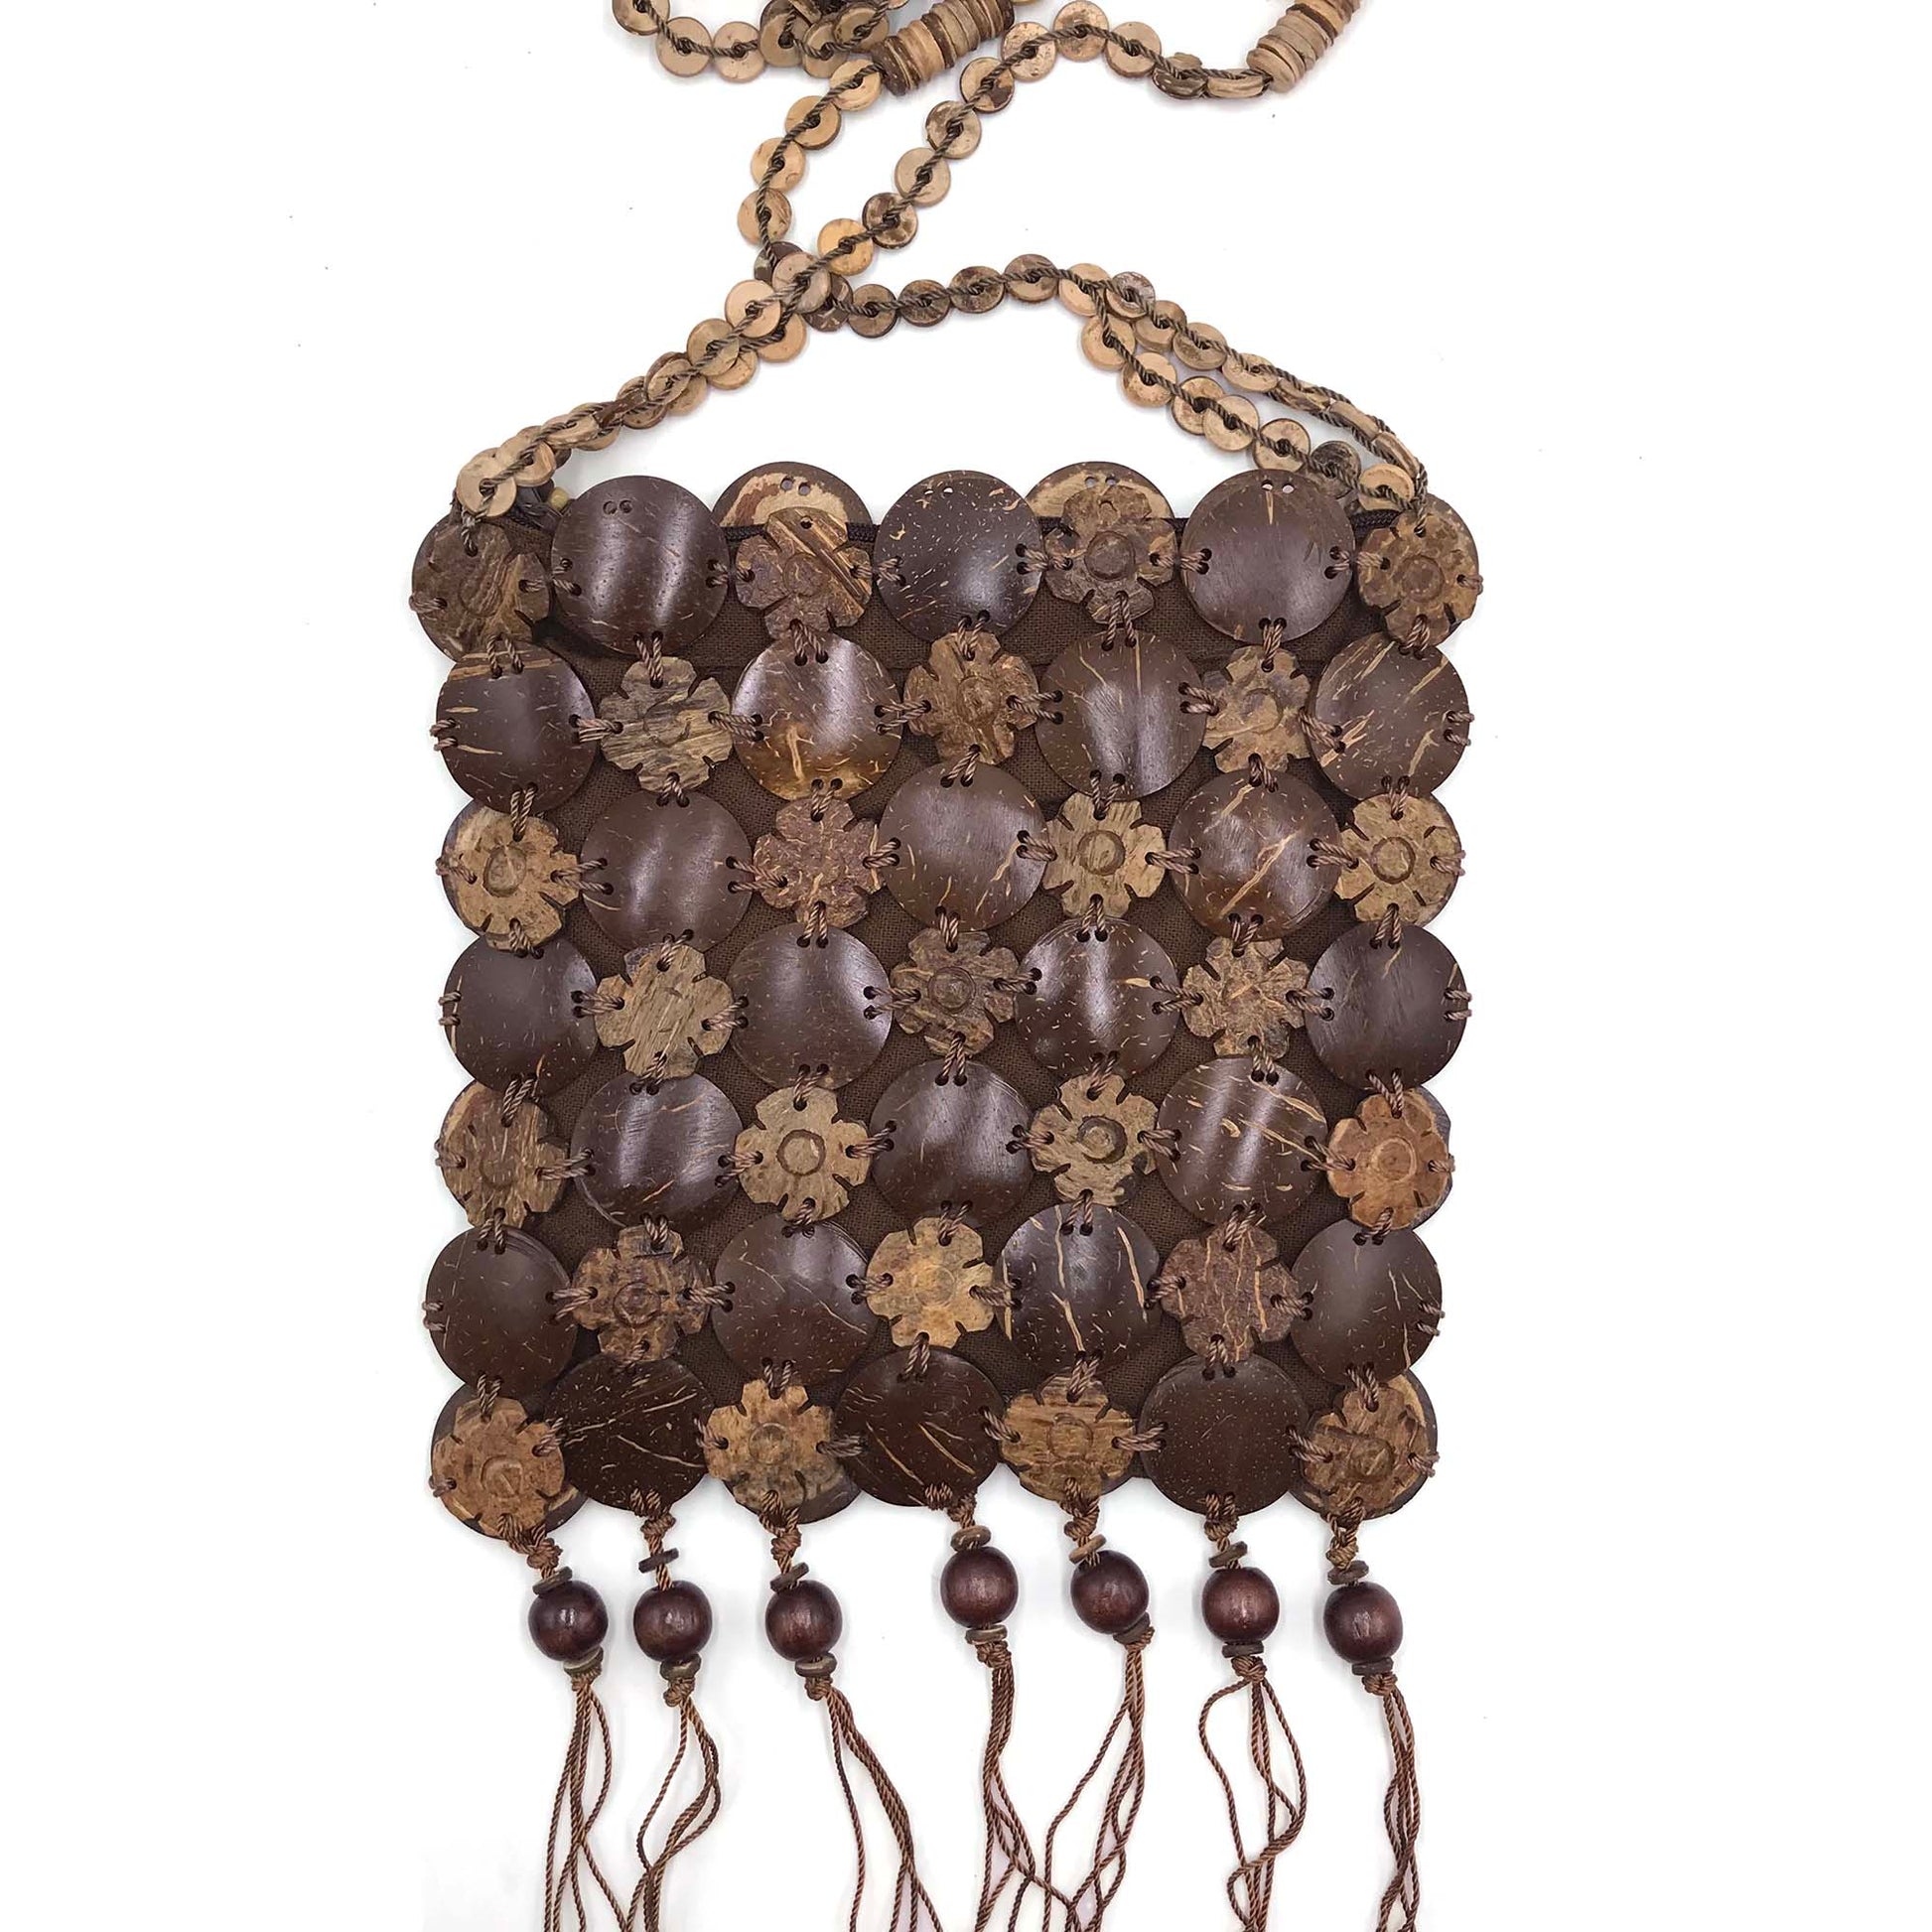 Sling bag hand-crafted from coconut shells